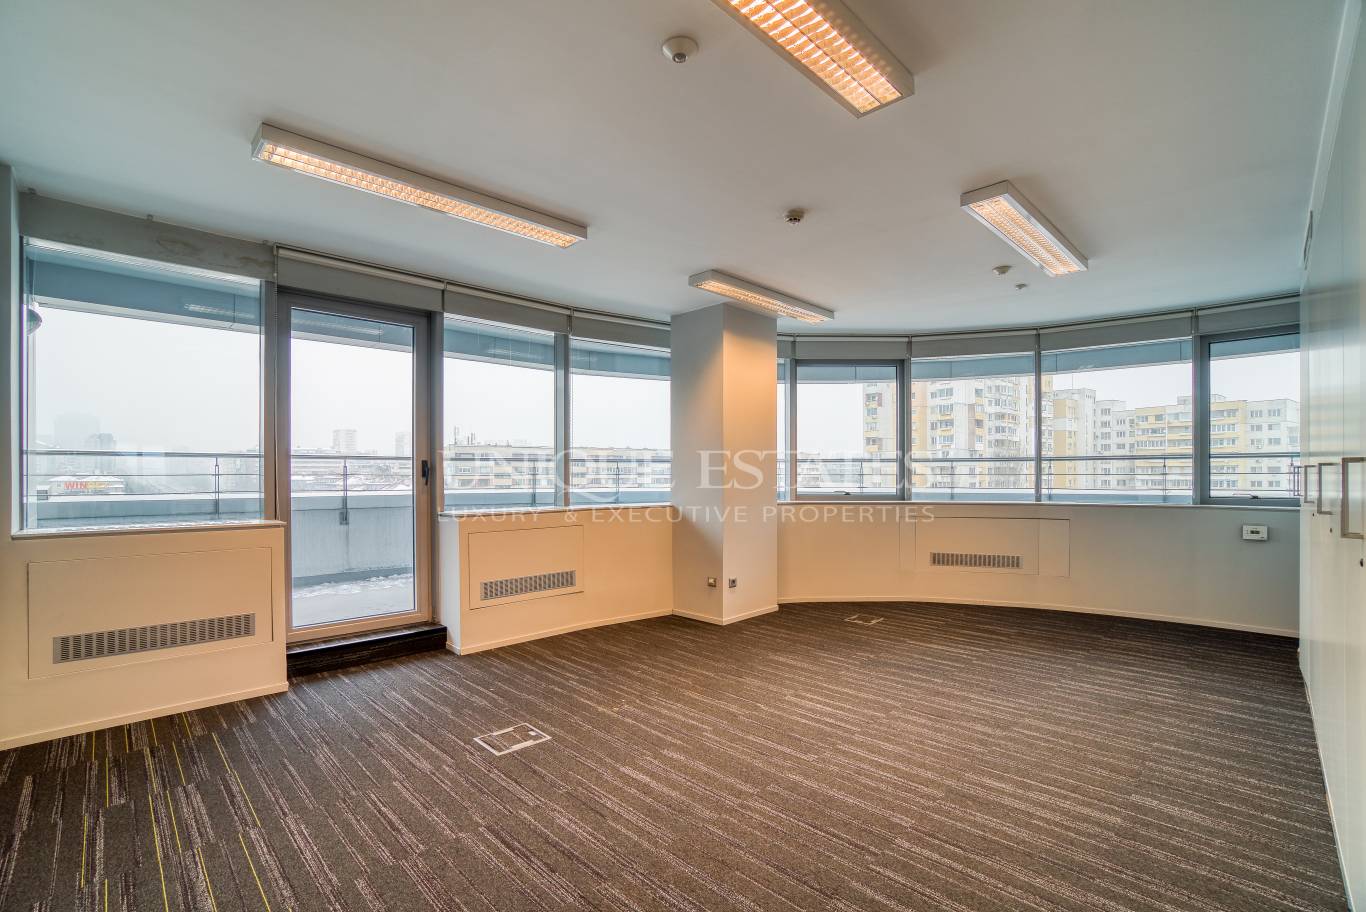 Office for rent in Sofia, Bulgaria Blvd with listing ID: K12488 - image 4